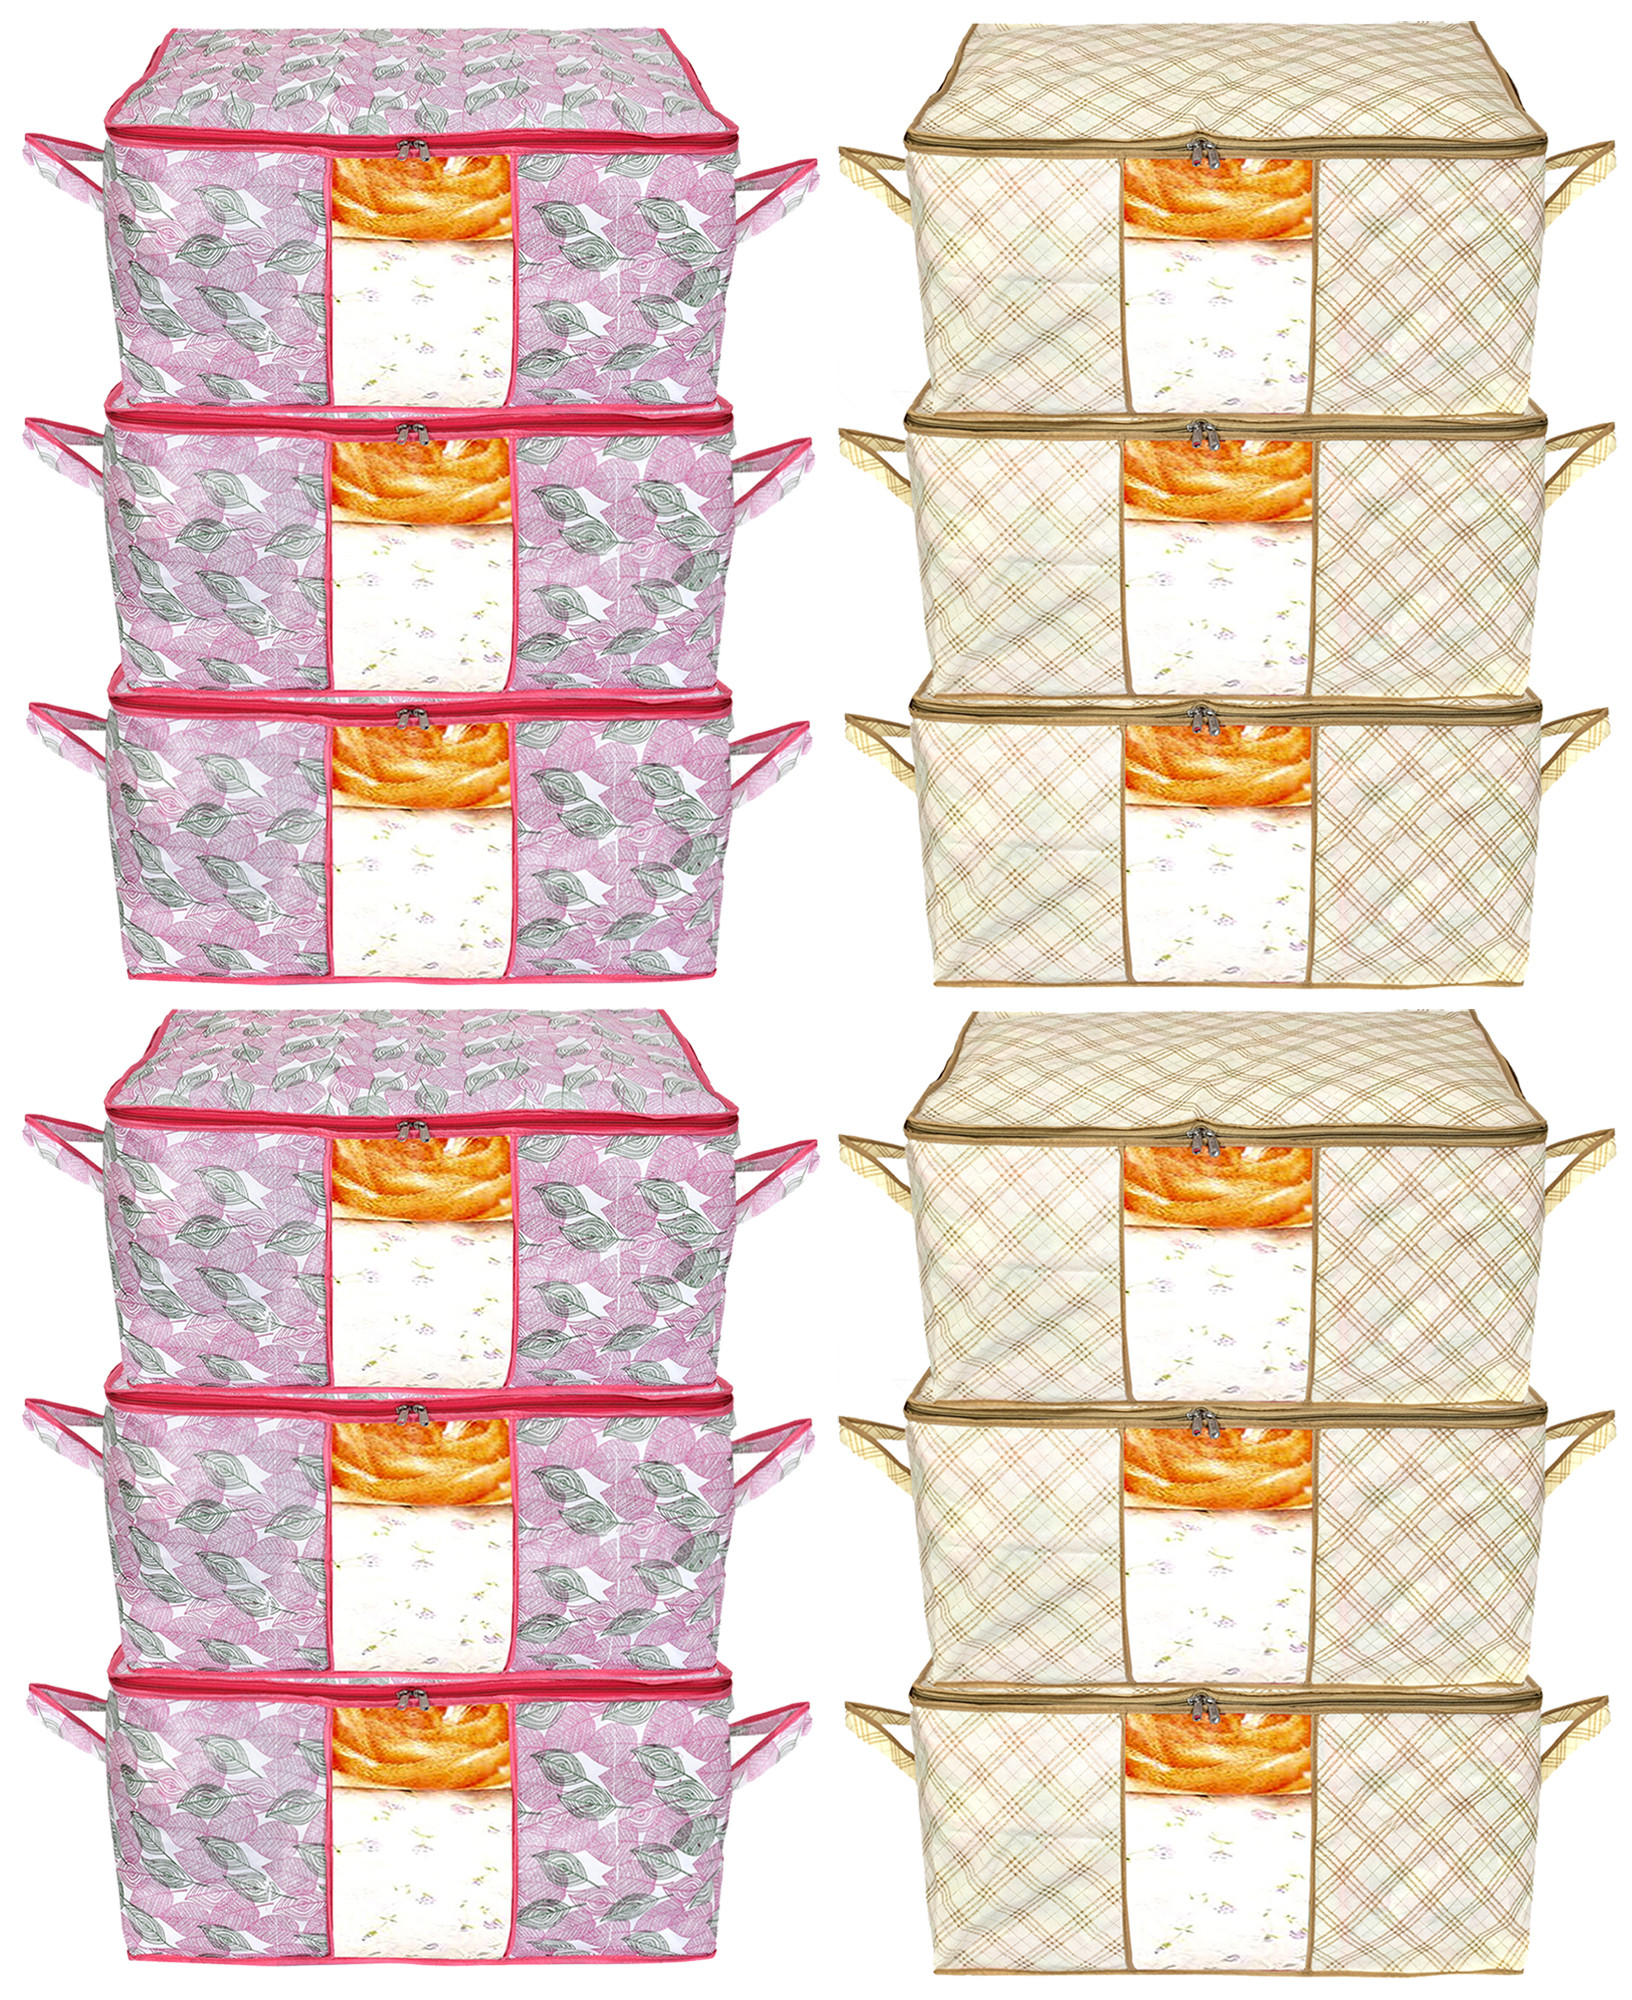 Kuber Industries Metalic Leafy,Checkered Print Non Woven Underbed Storage Bag,Cloth Organiser,Blanket Cover with Transparent Window (Pink & Ivory)-34_S_KUBMART16631